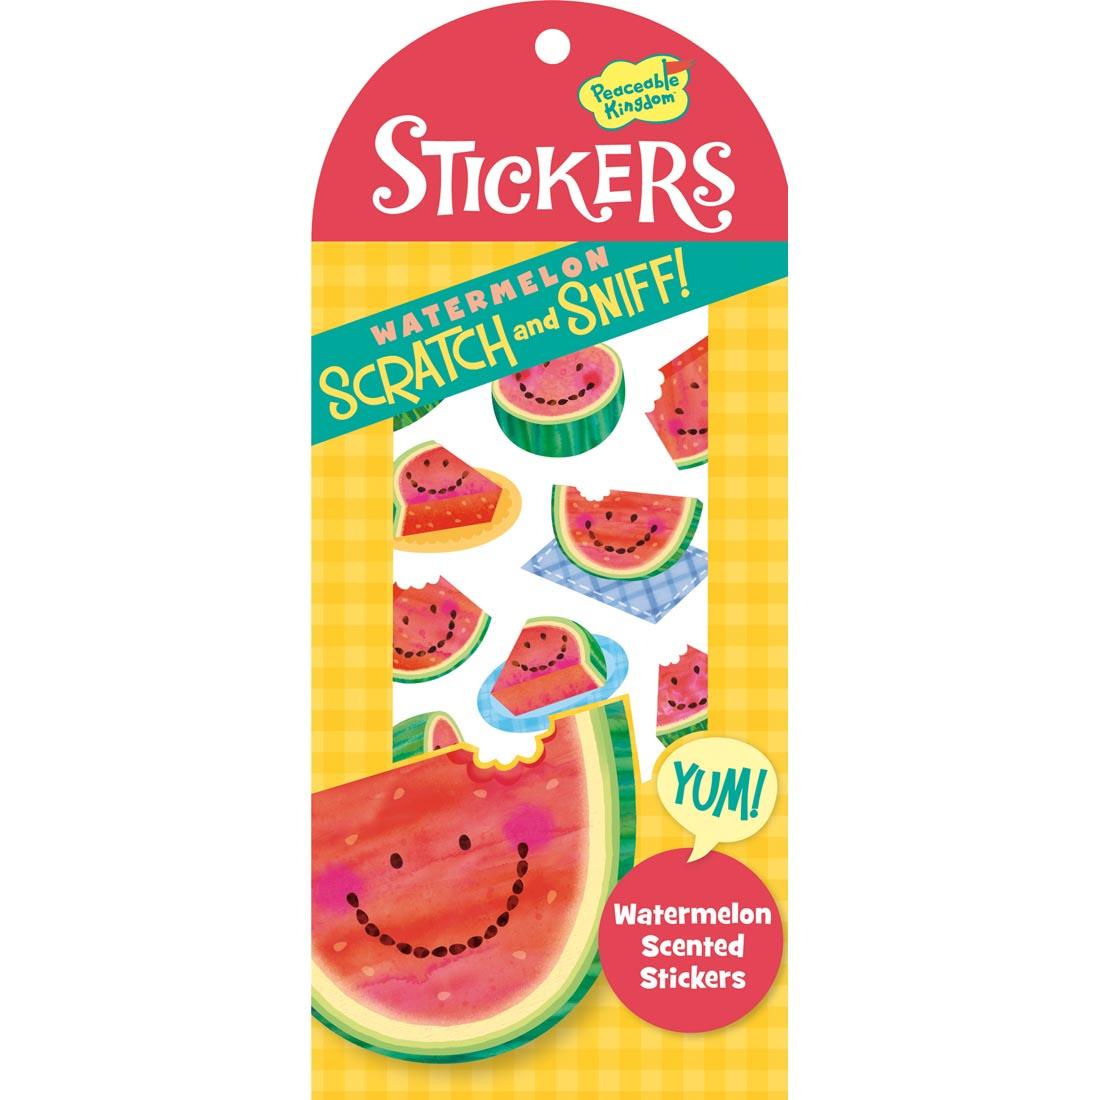 Watermelon Scratch and Sniff Stickers by Peaceable Kingdom